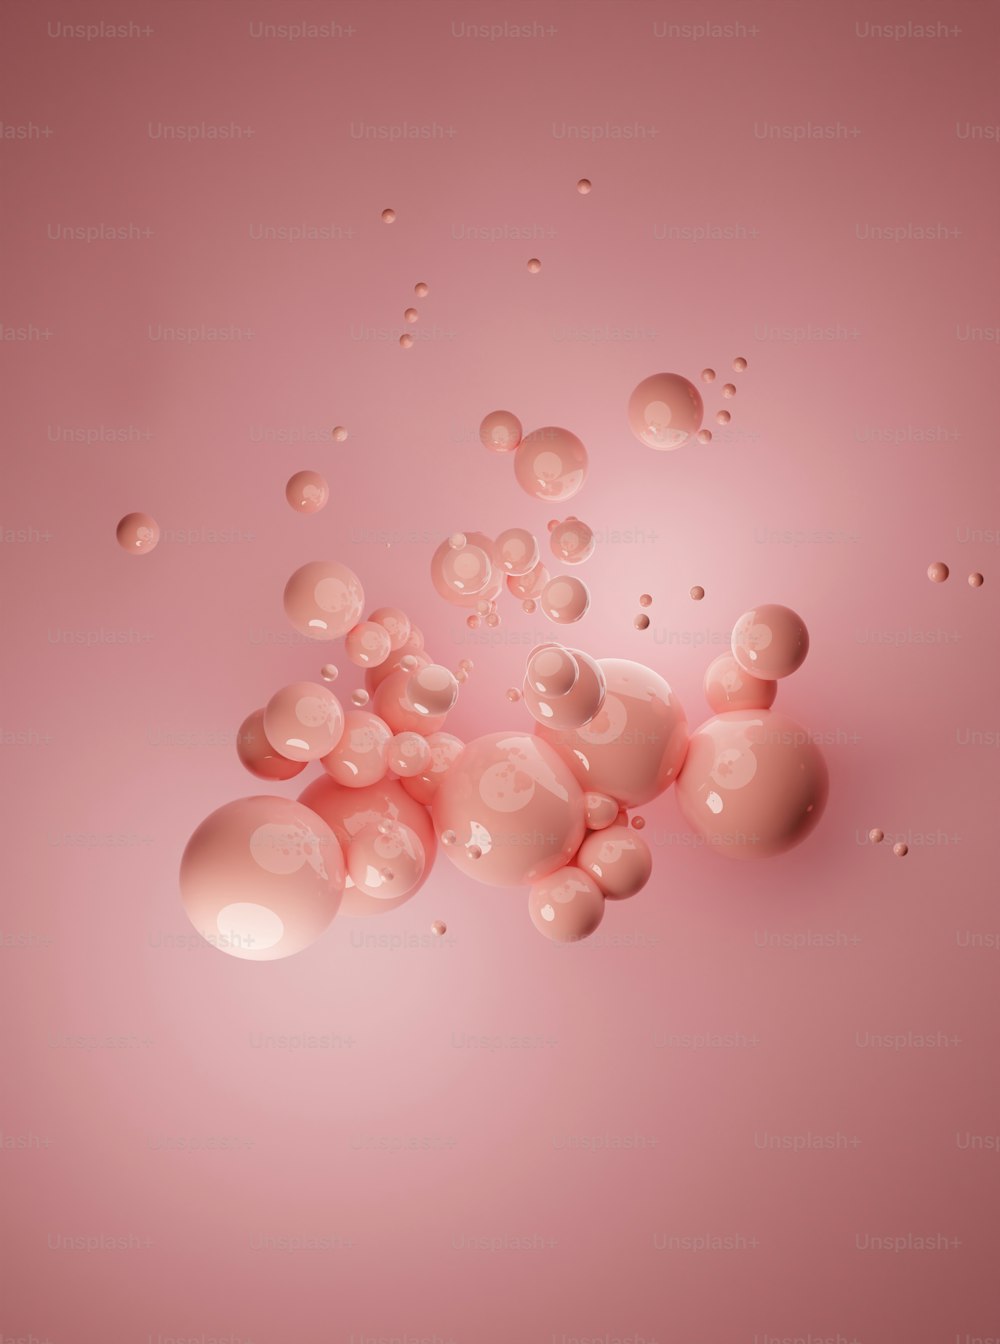 a group of bubbles floating on top of a pink surface